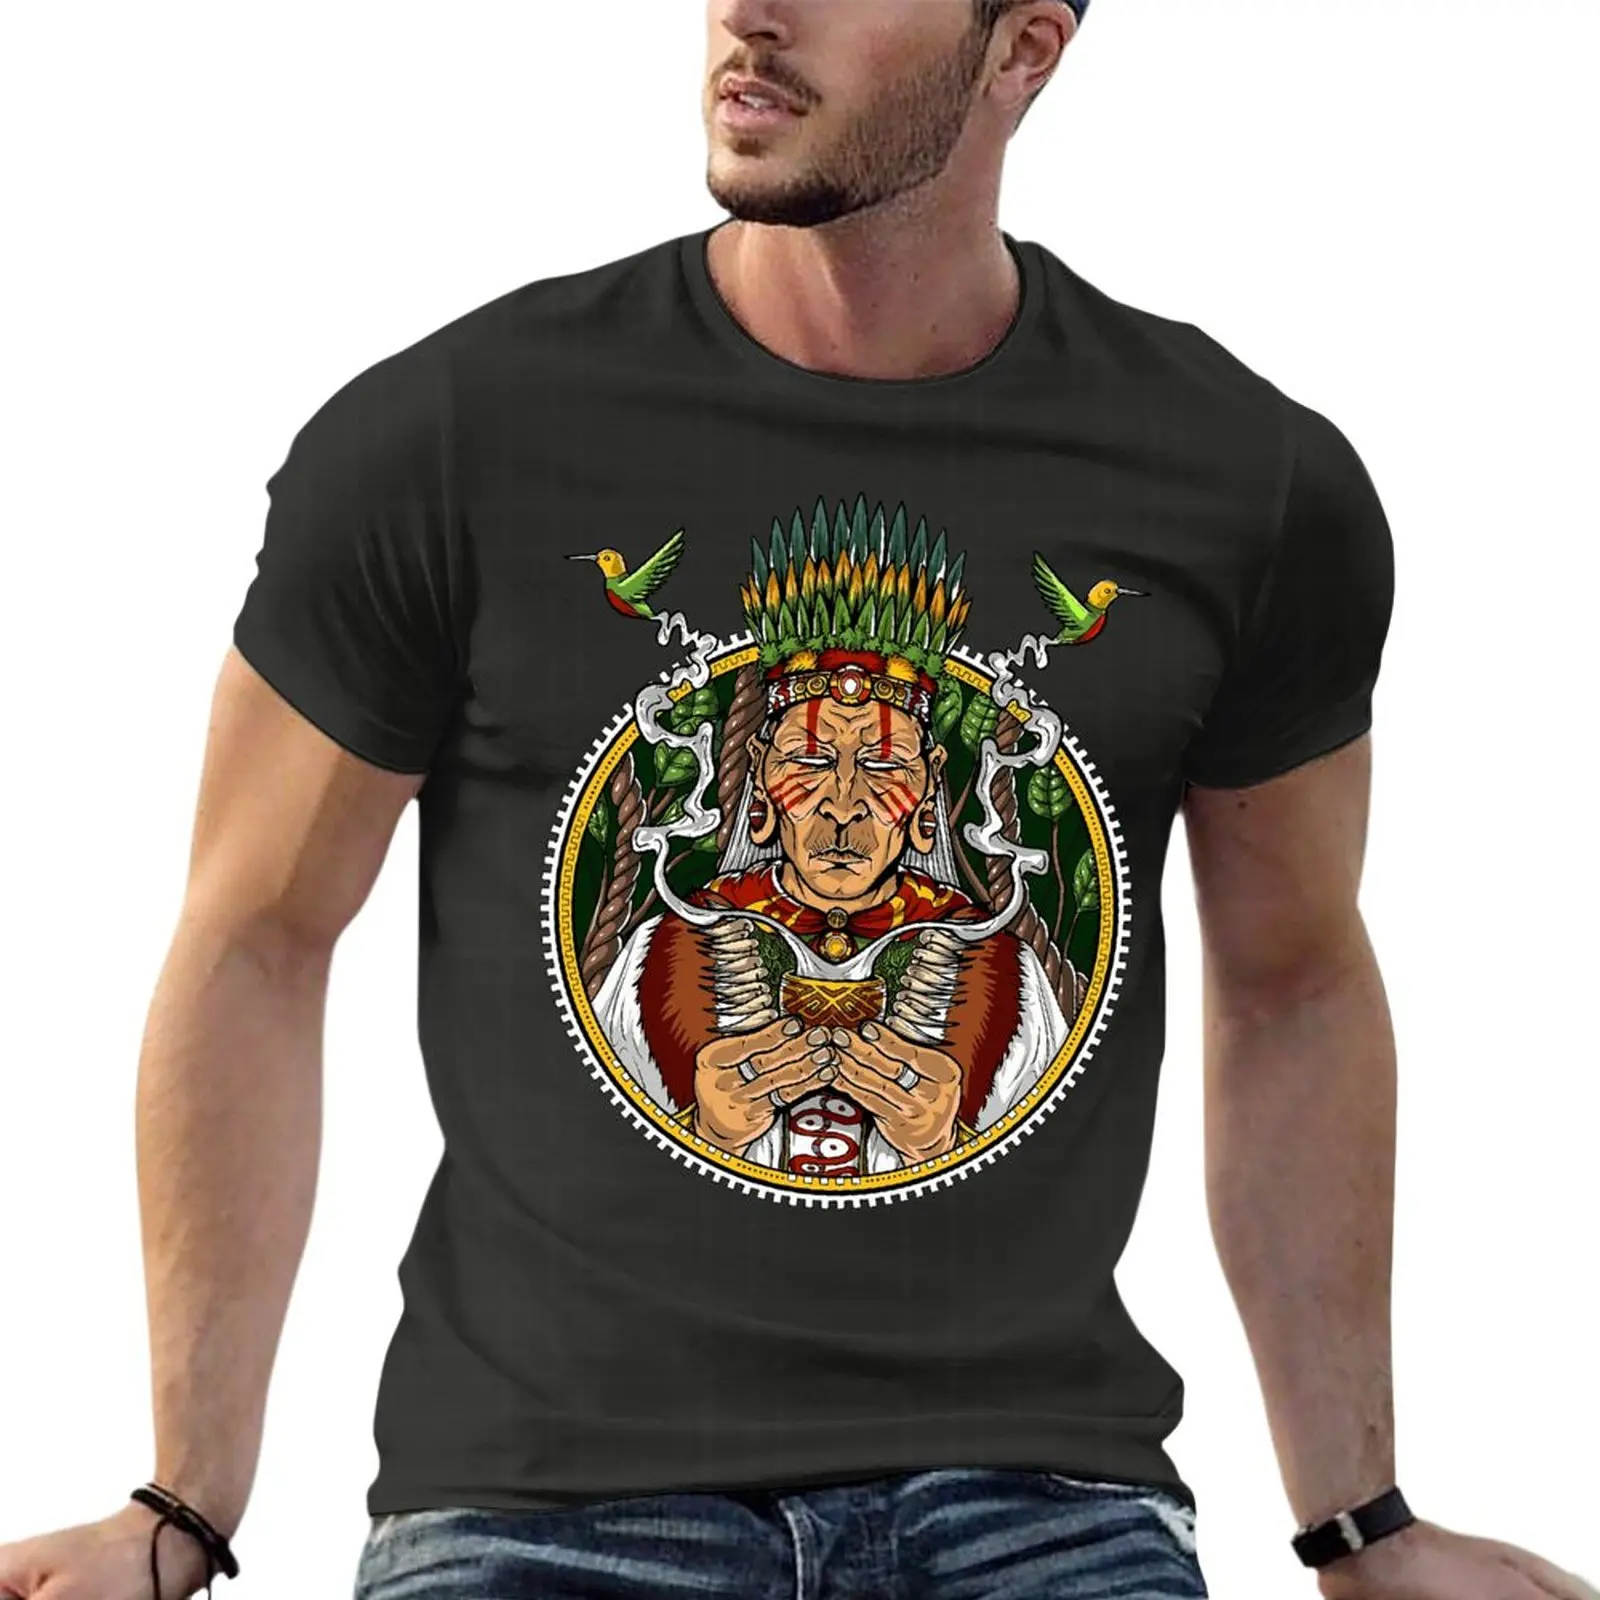 

Ayahuasca Shaman Psychedelic Dmt Hippie Festival Oversized T-Shirt Branded Mens Clothing Short Sleeve Streetwear Tops Tee